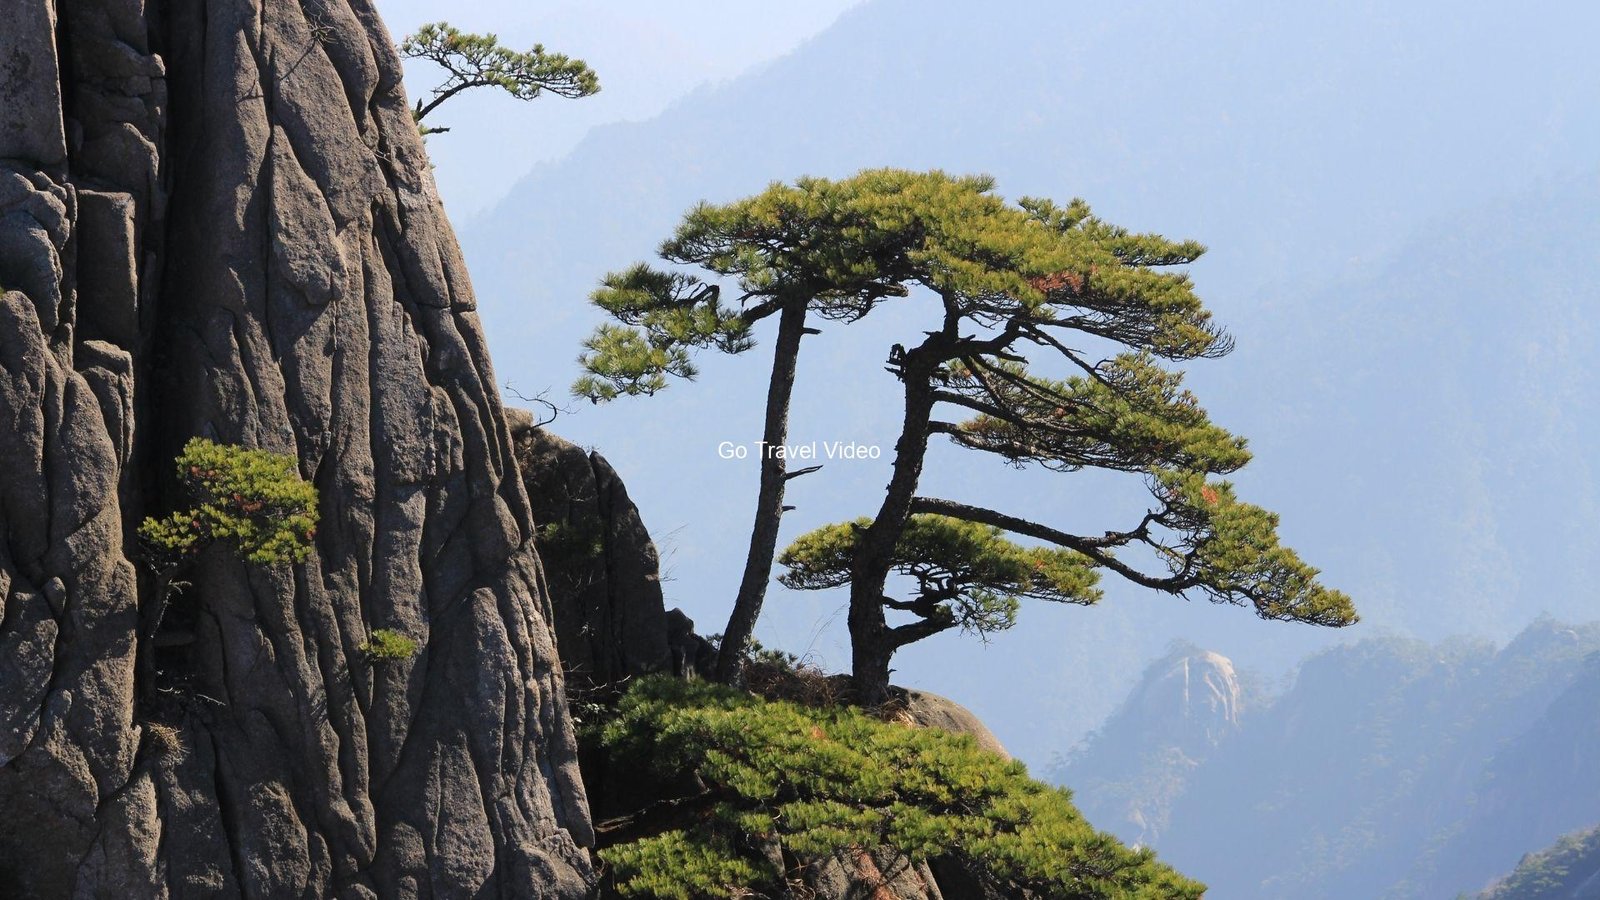 A picture containing tree, outdoor, rock, plant

Description automatically generated